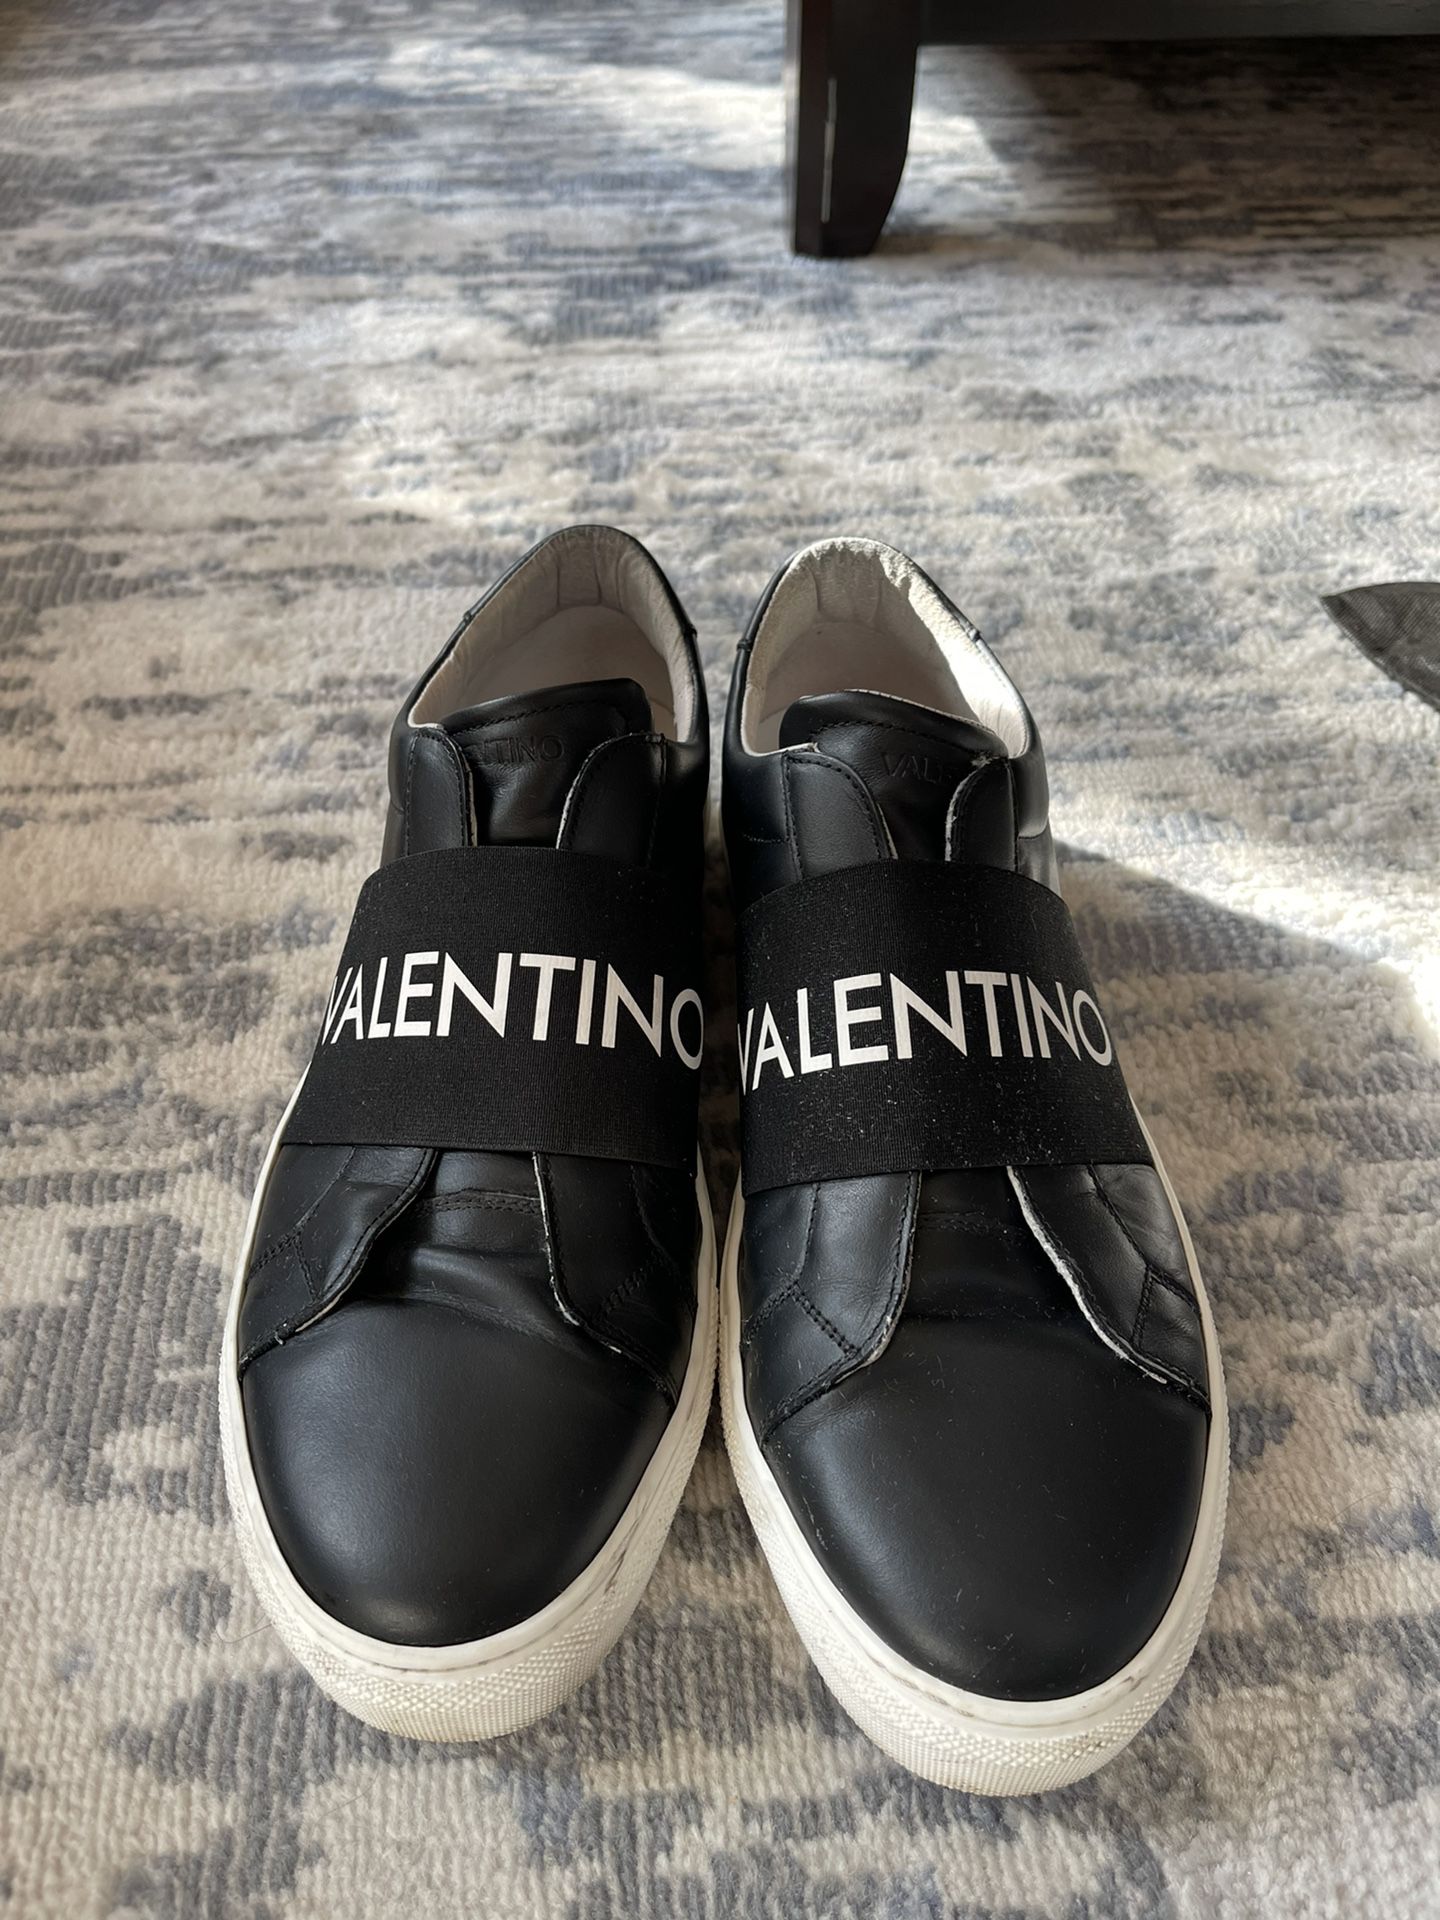 Valentino By Mario Valentino Shoes for Sale in Seattle, WA - OfferUp